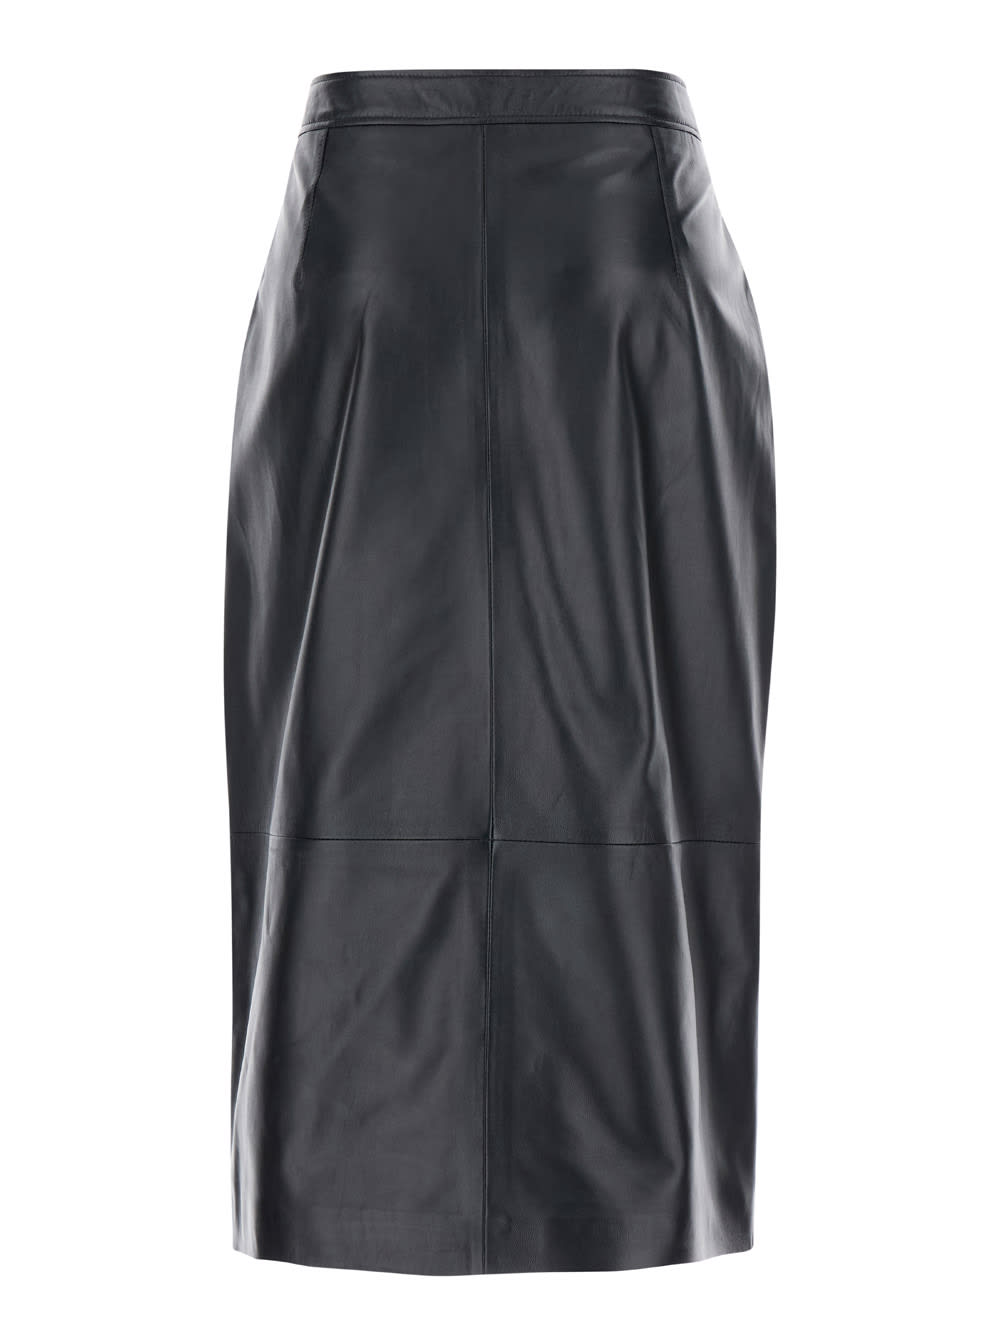 Midi Black Skirt With Front Slit In Leather Woman